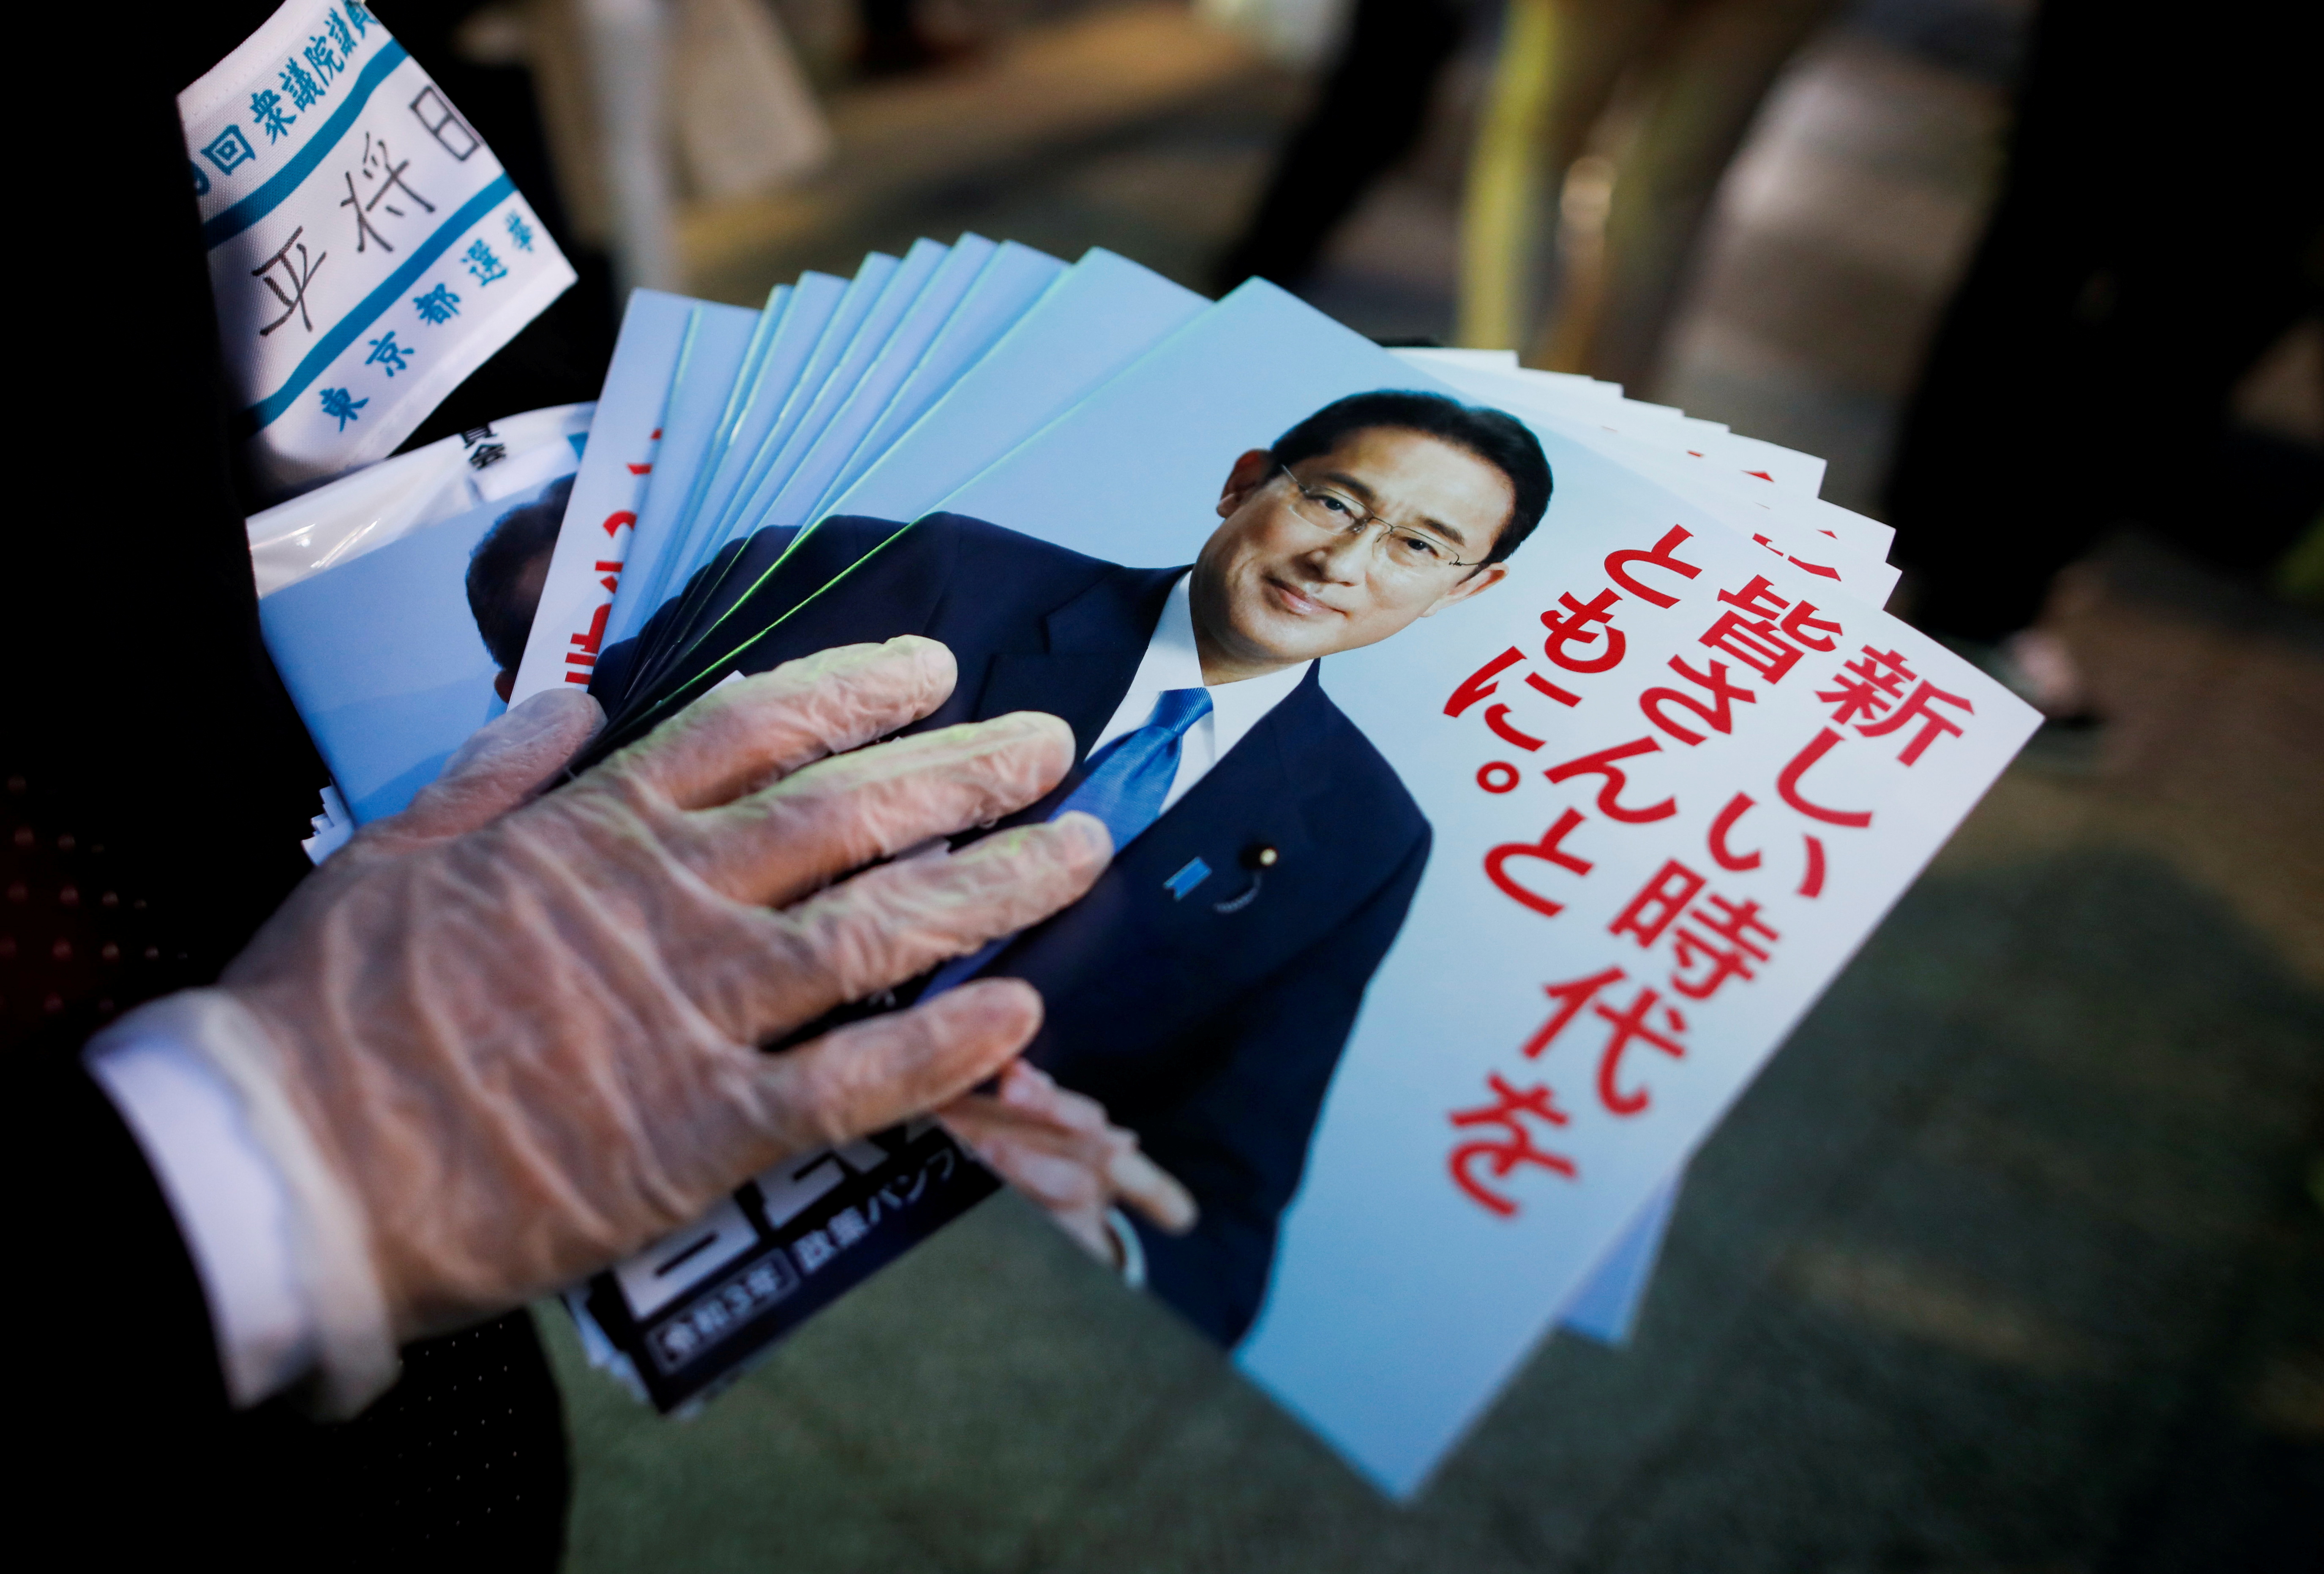 An election campaign staff member holds leaflets of Japan's ruling Liberal Democratic Party during an election campaign for the upcoming lower house election in Tokyo